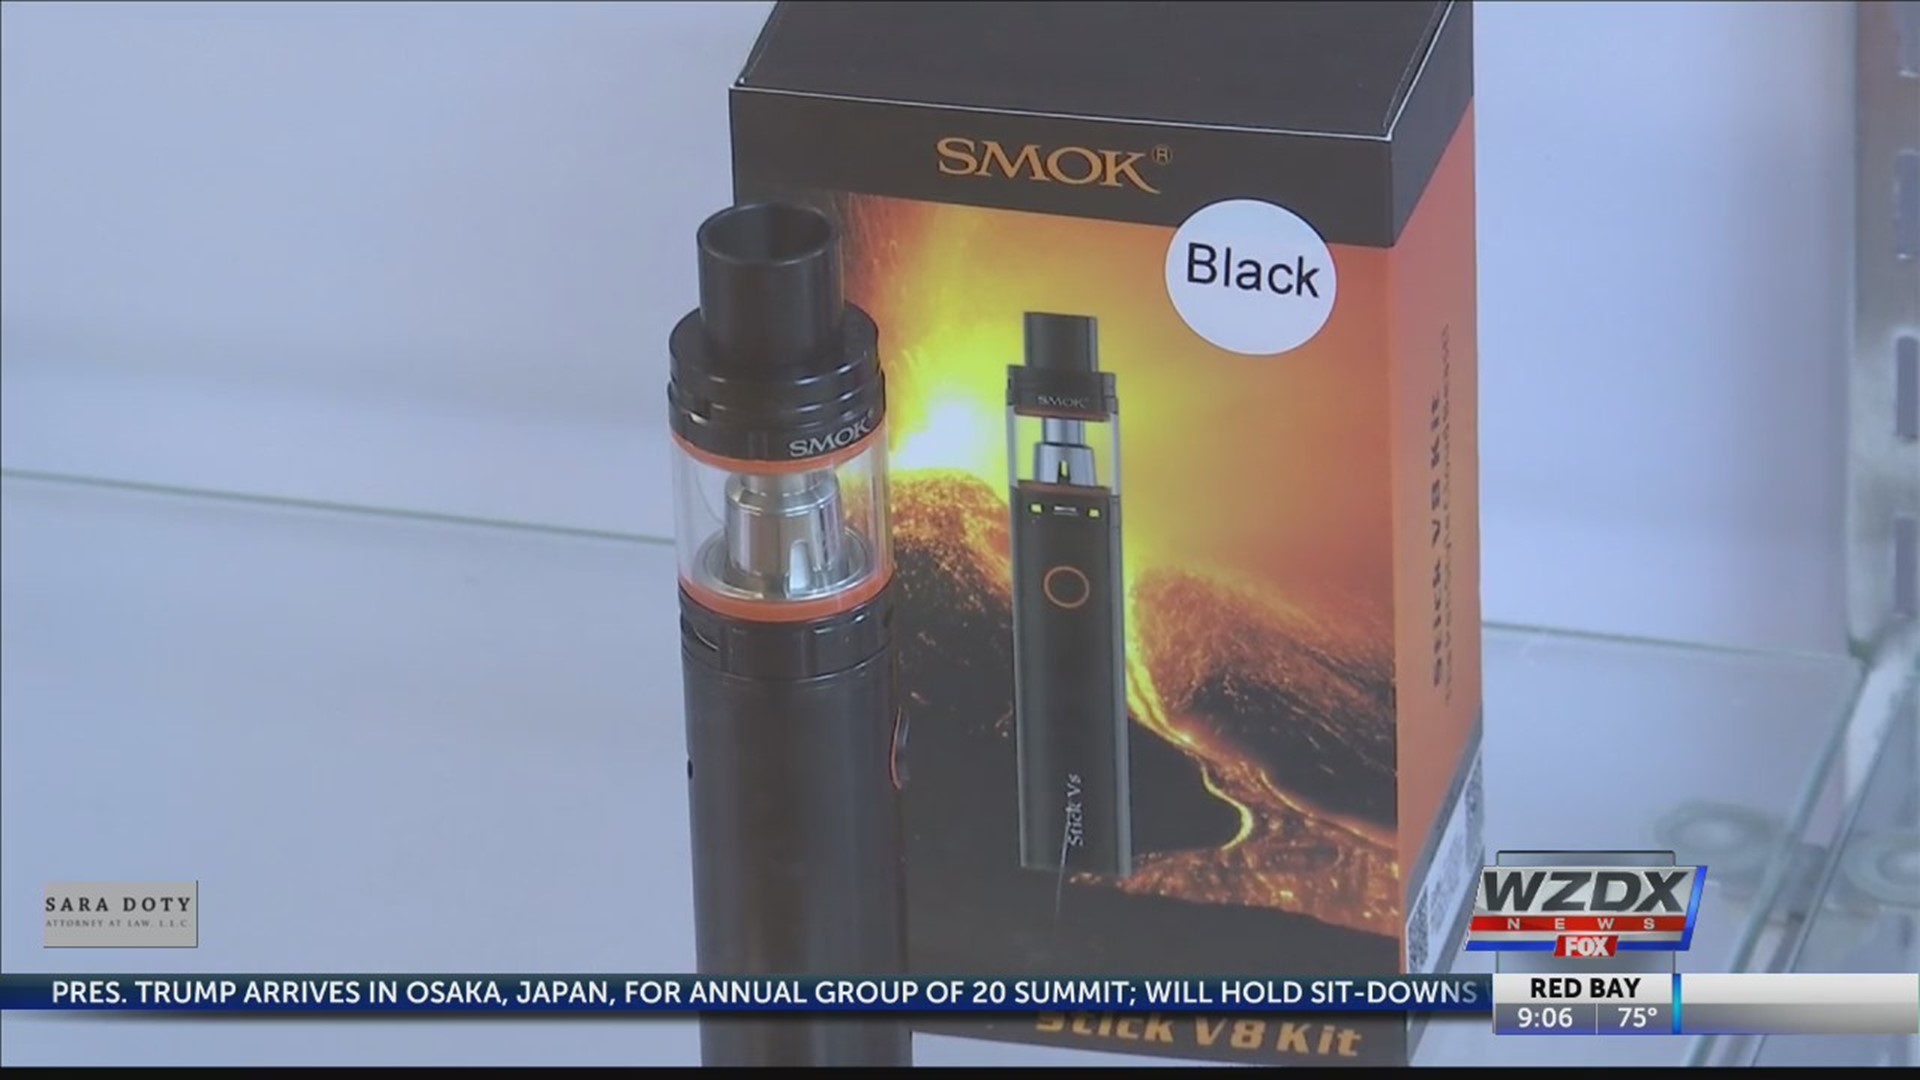 New statistics show more teens in Alabama use e-cigarettes than in other states.